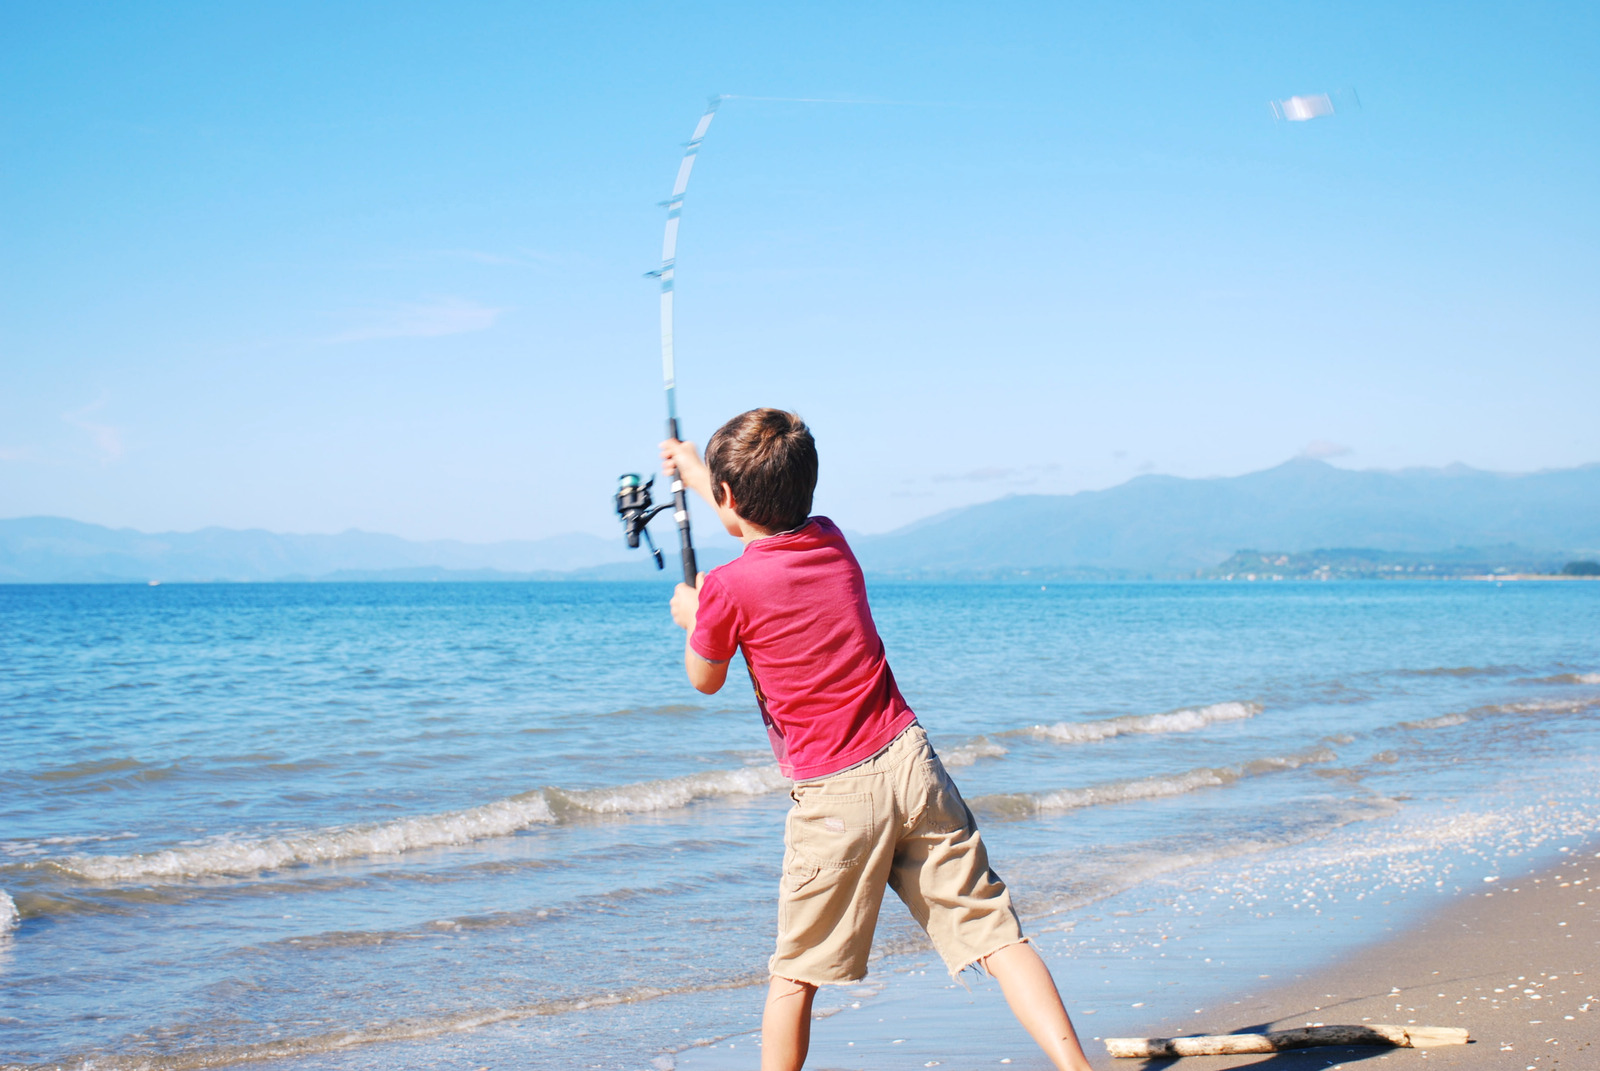 A boy child fishes with his rod against a seascape background on a surf fishing trip in summer.